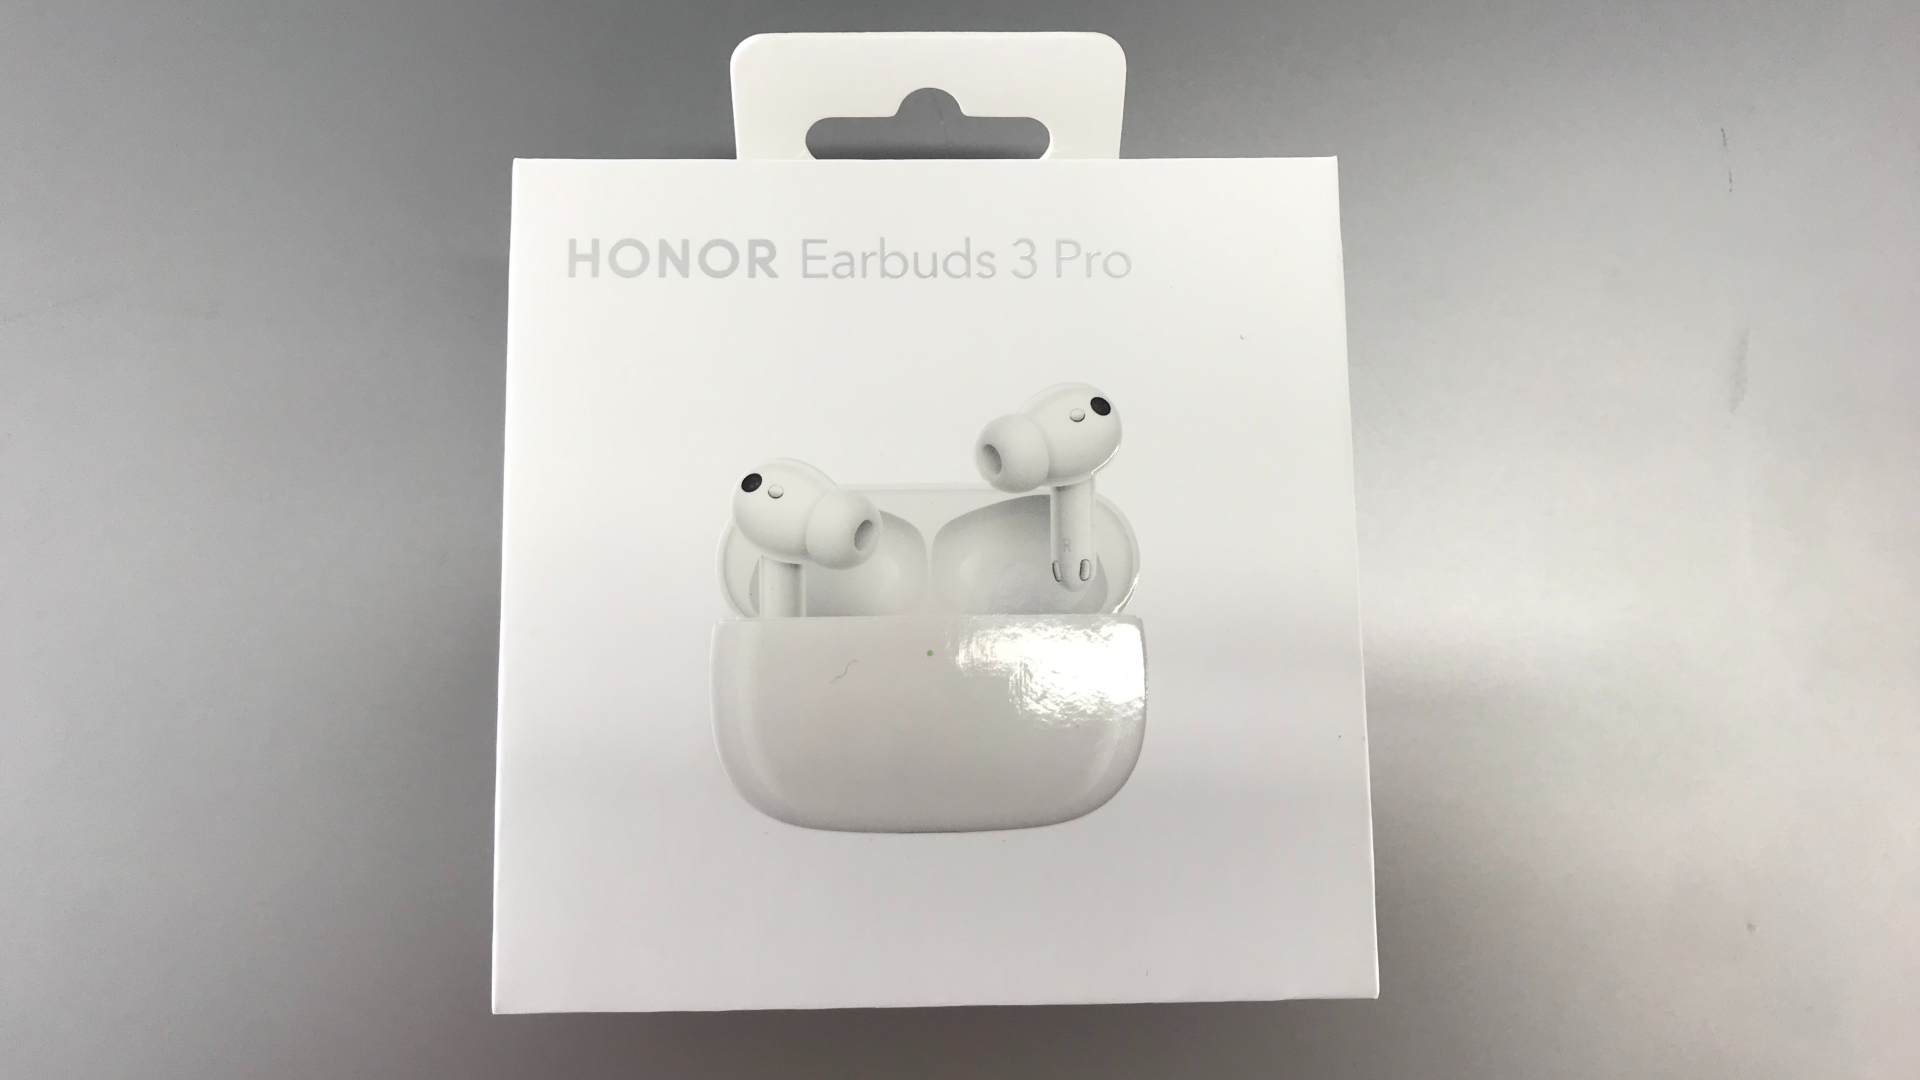 Honor Earbuds 3 Pro packaging on silver background